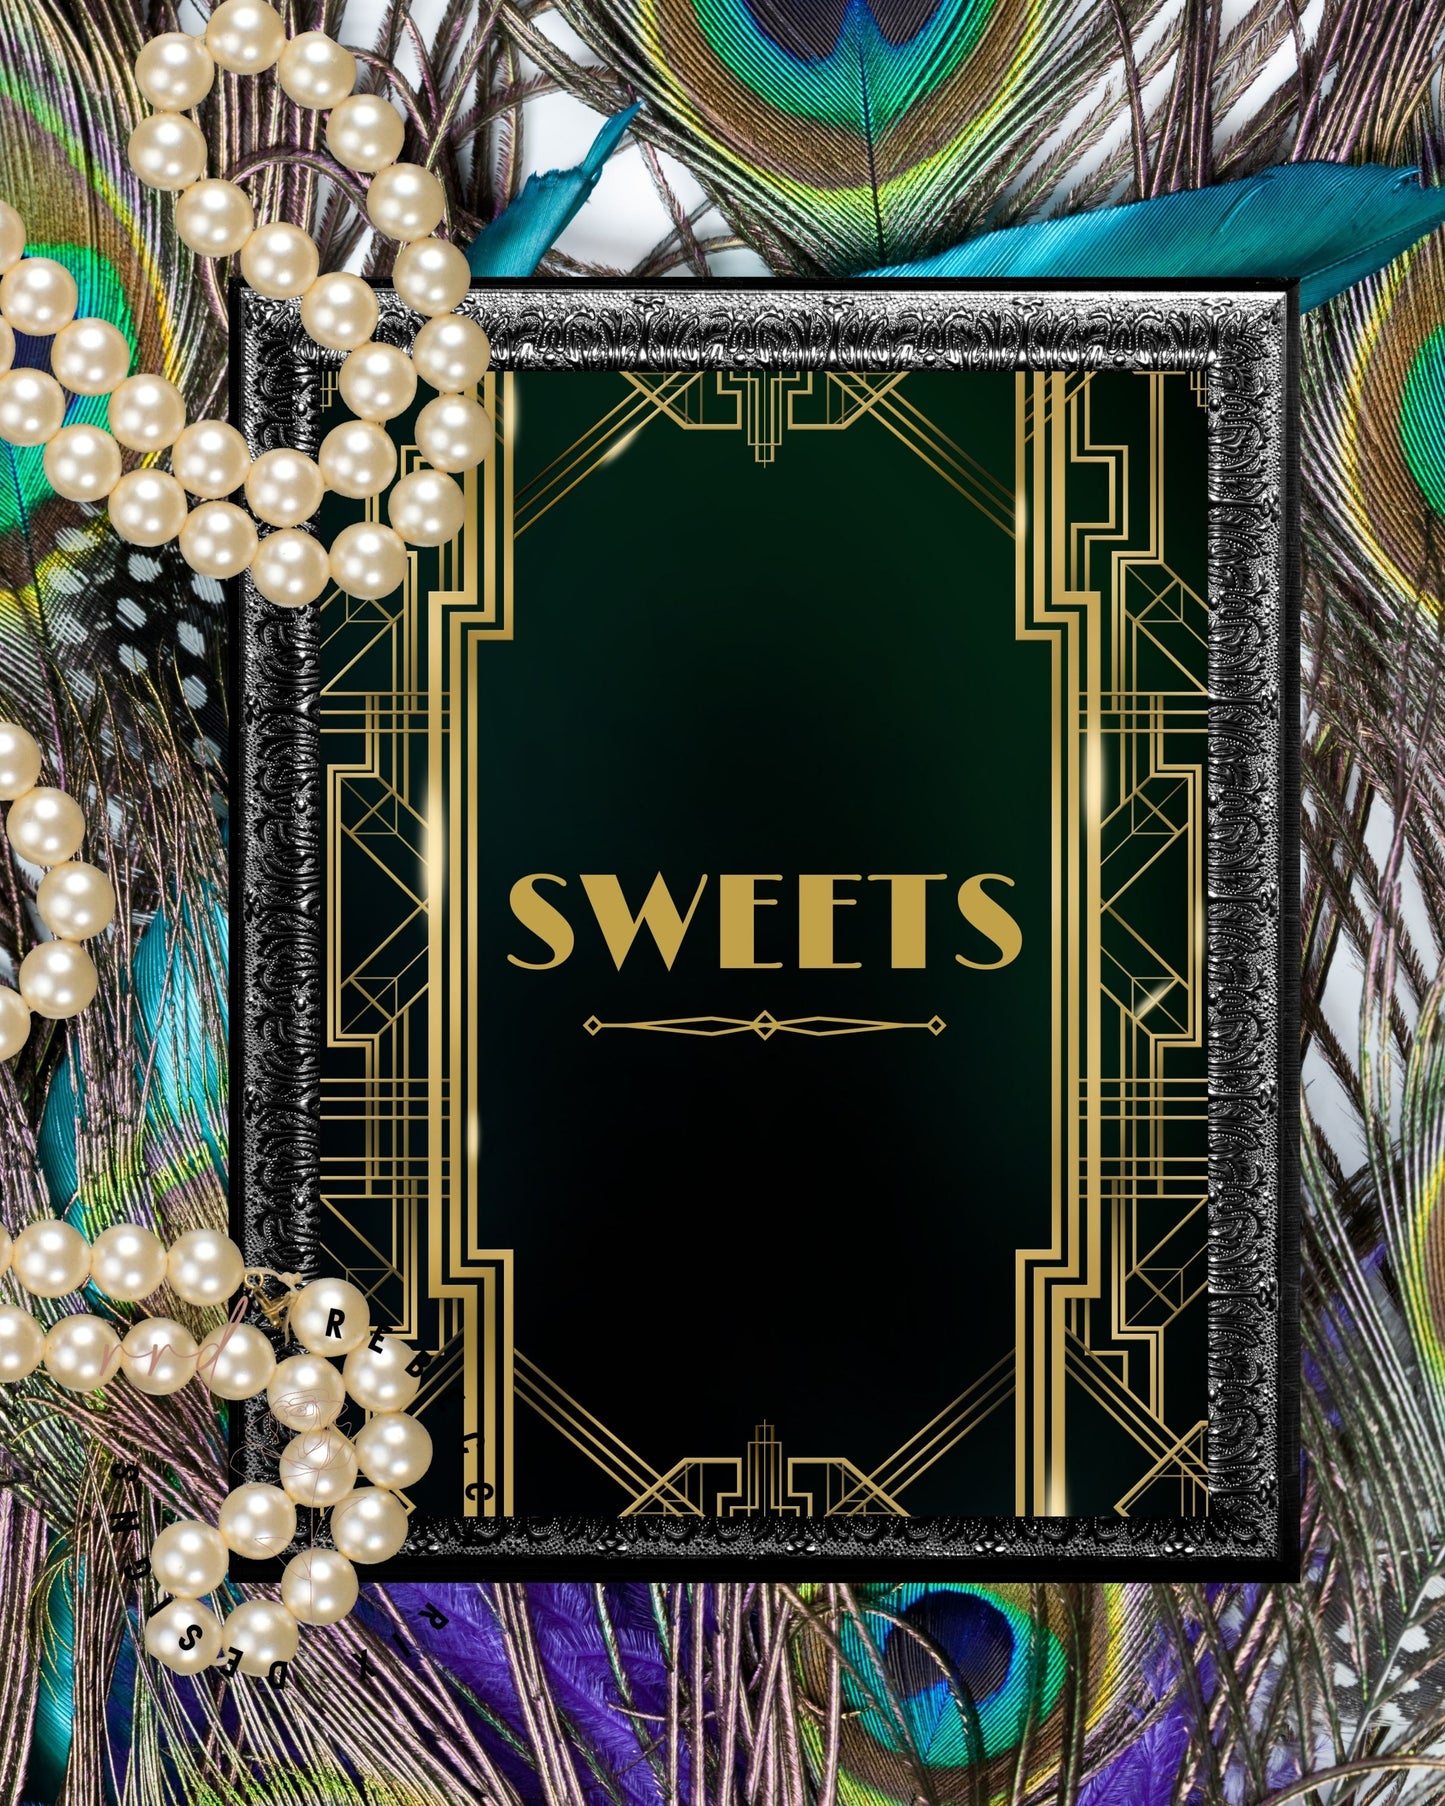 "Sweets" Art Deco Printable Party Sign For Great Gatsby or Roaring 20's Party Or Wedding, Black & Gold, Printable Party Decor